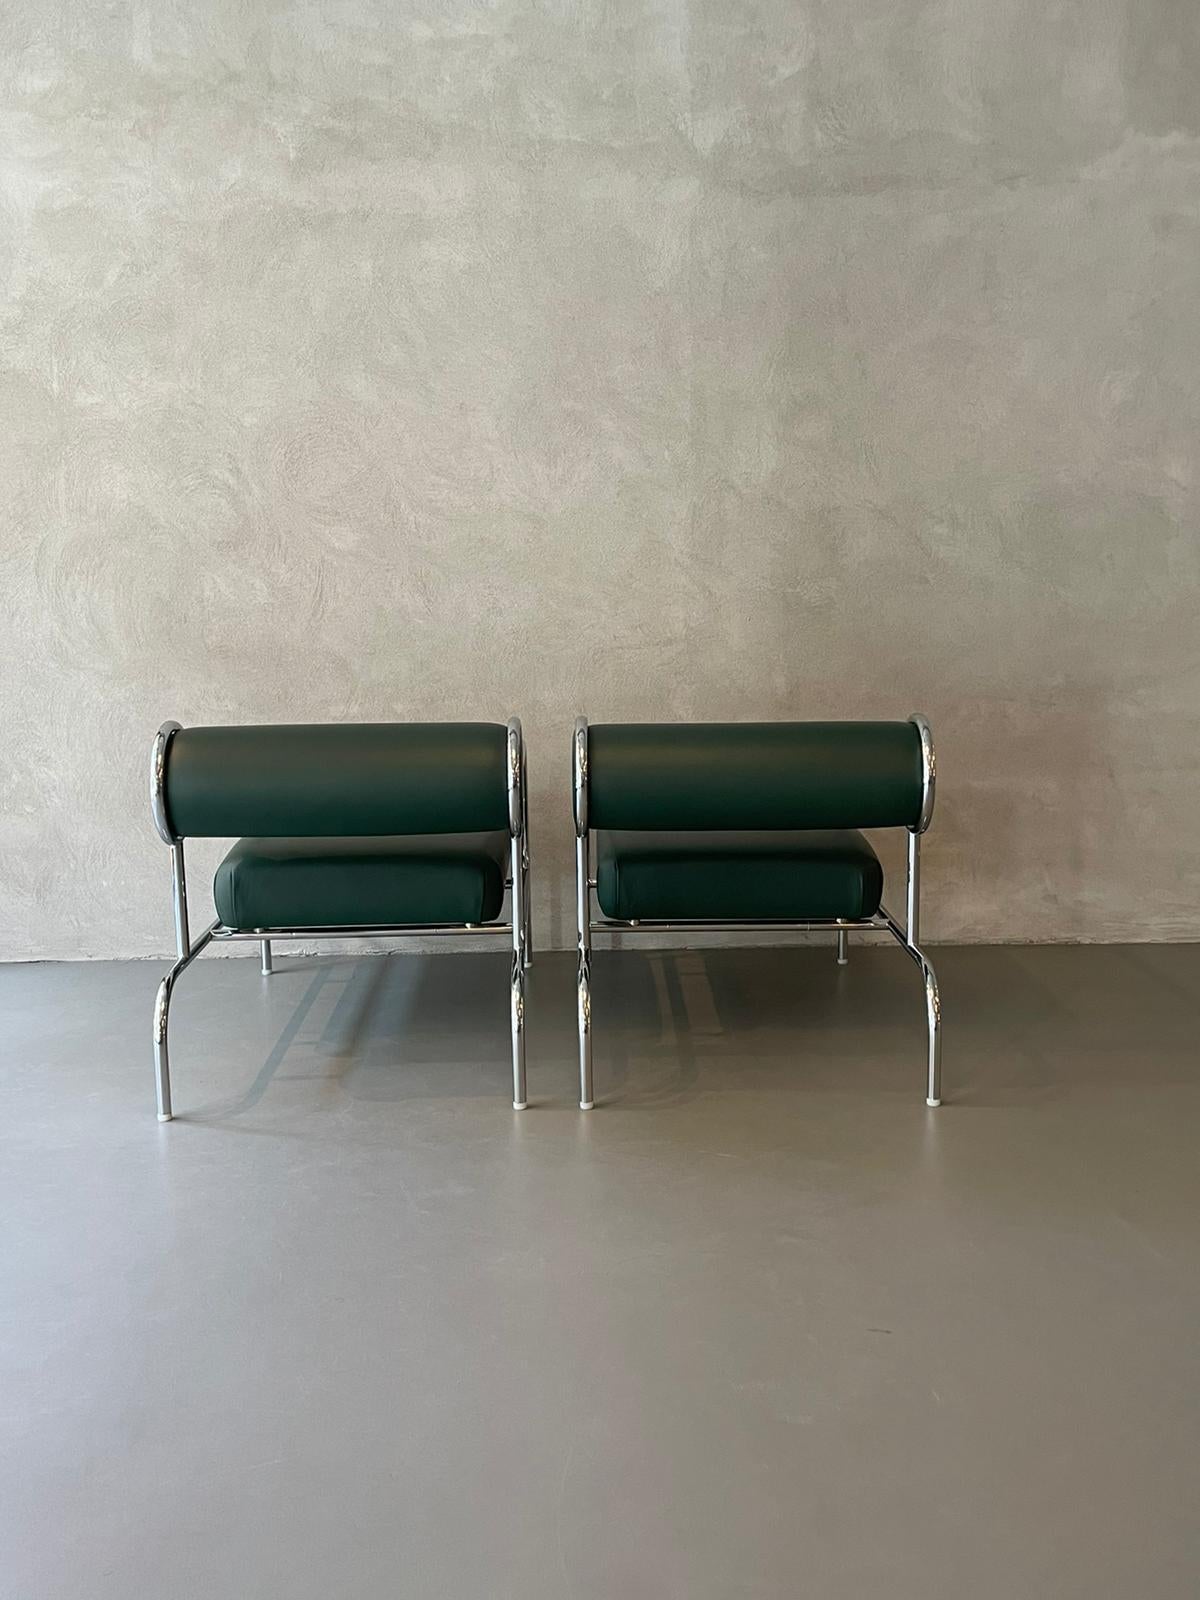 Armchairs designed by Shiro Kuramata in 1970s.
Pair of armchairs with a chromed tubular structure that appears to be light and with a simplified design.
These have a long rectangular padded seat covered in green leather and a cylindrical cushion